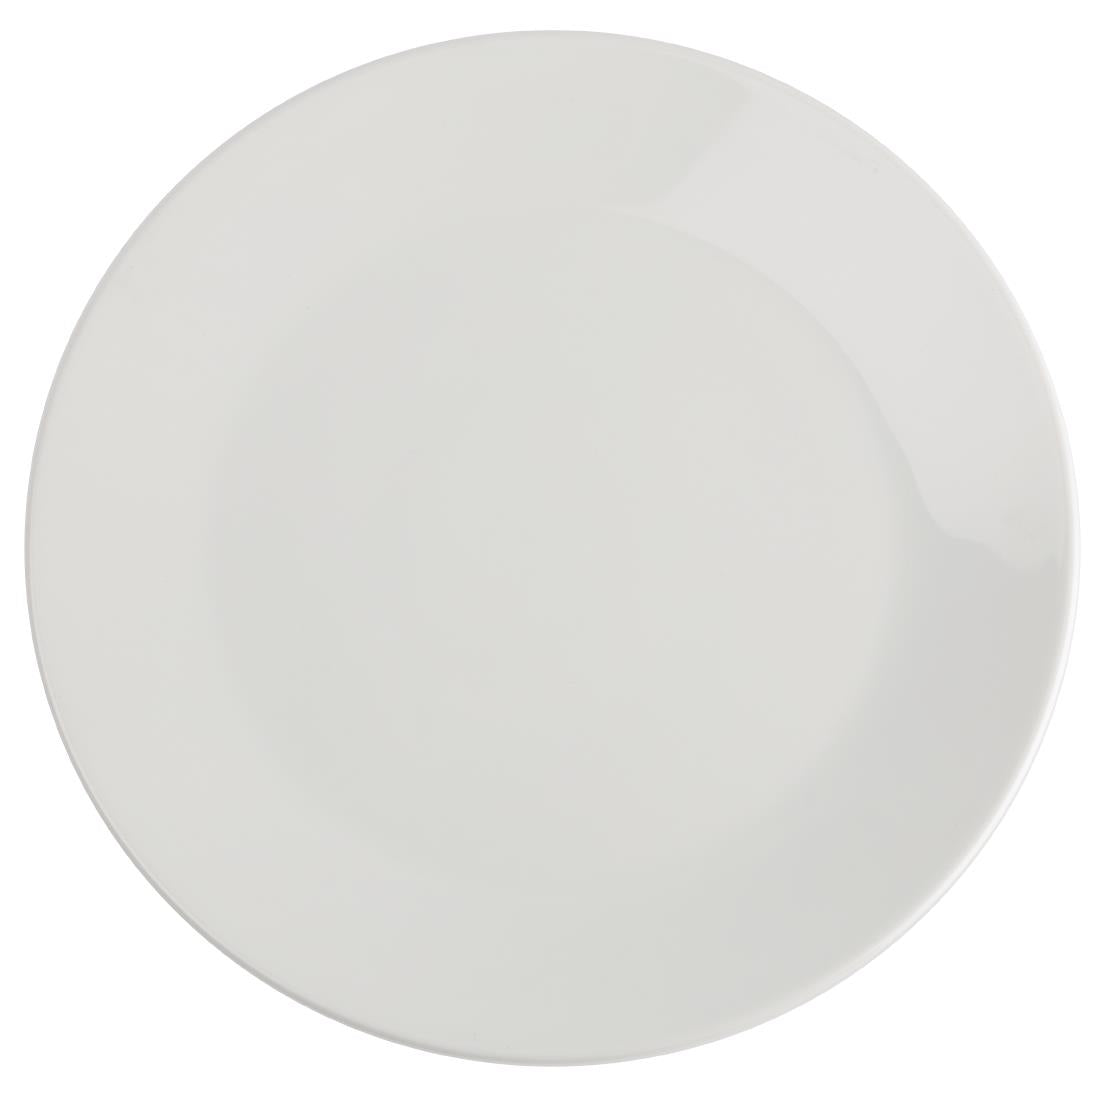 CG004 Royal Porcelain Classic White Coupe Plates 240mm (Pack of 12)